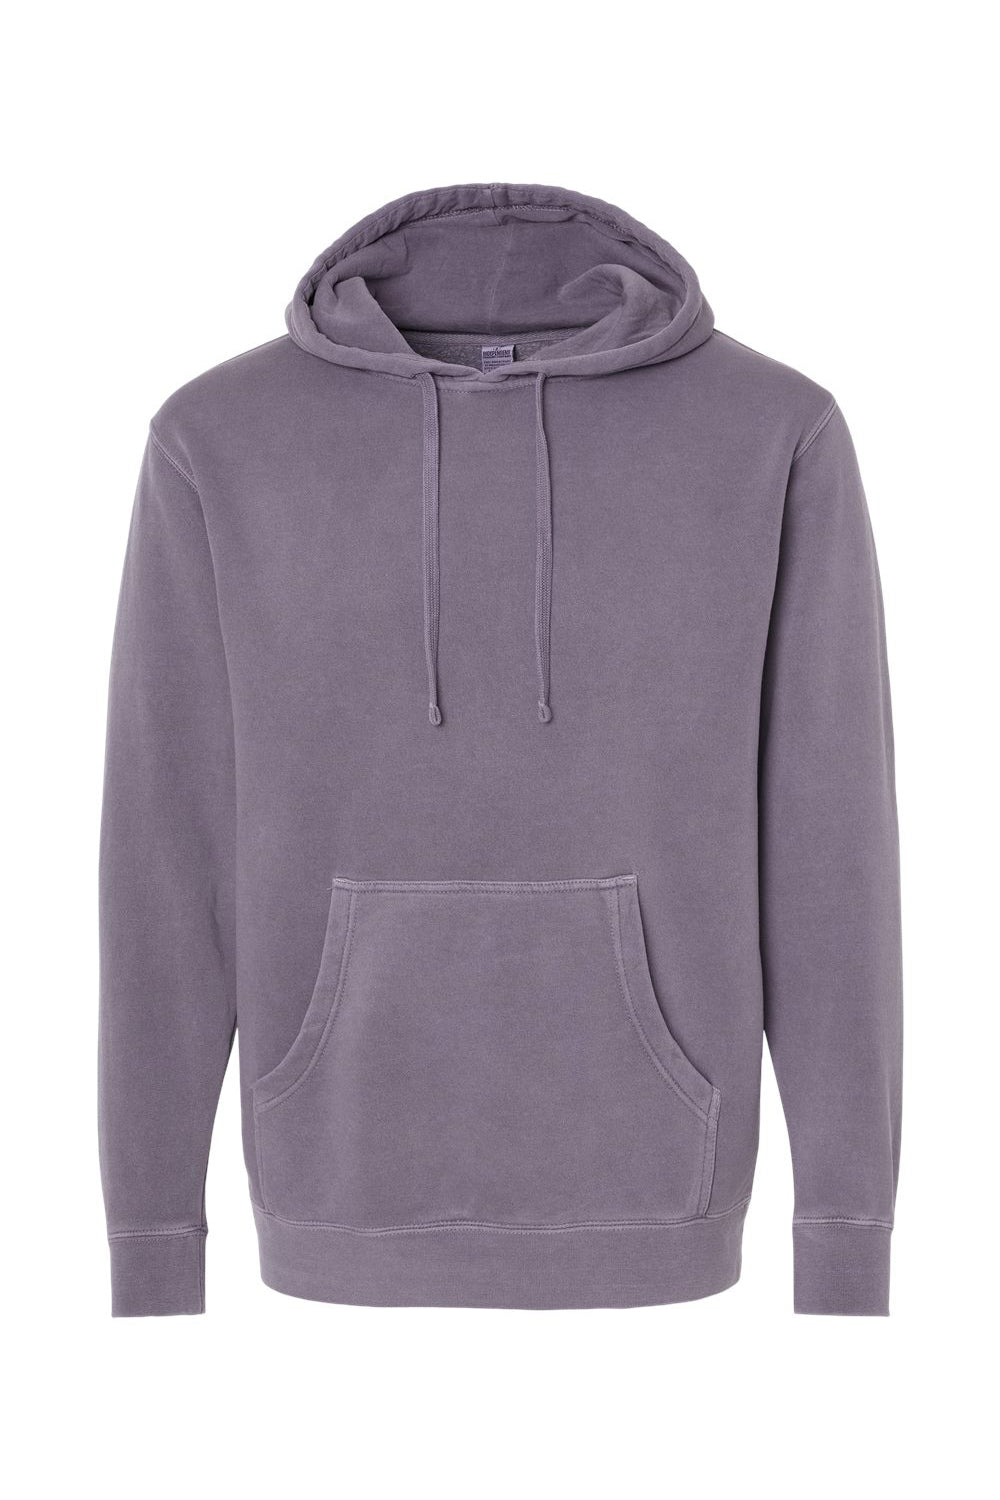 Independent Trading Co. PRM4500 Mens Pigment Dyed Hooded Sweatshirt Hoodie Plum Purple Flat Front